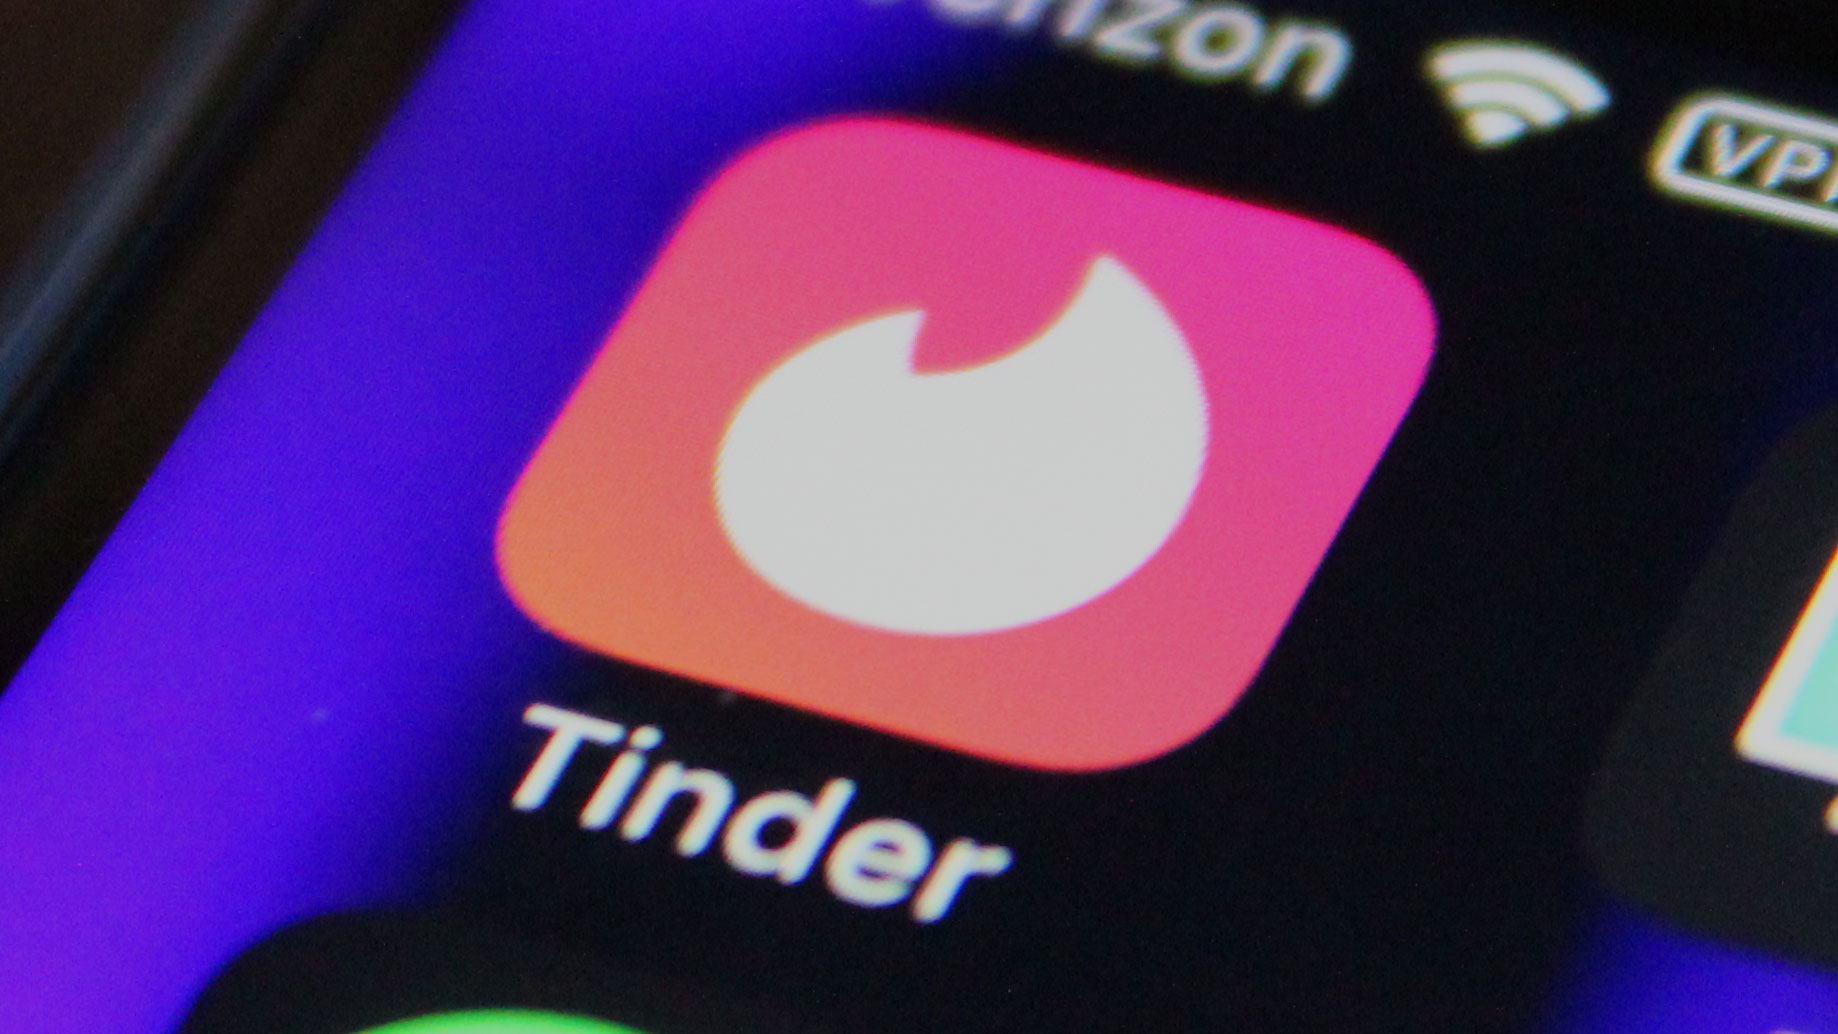 Tinder common connections explained